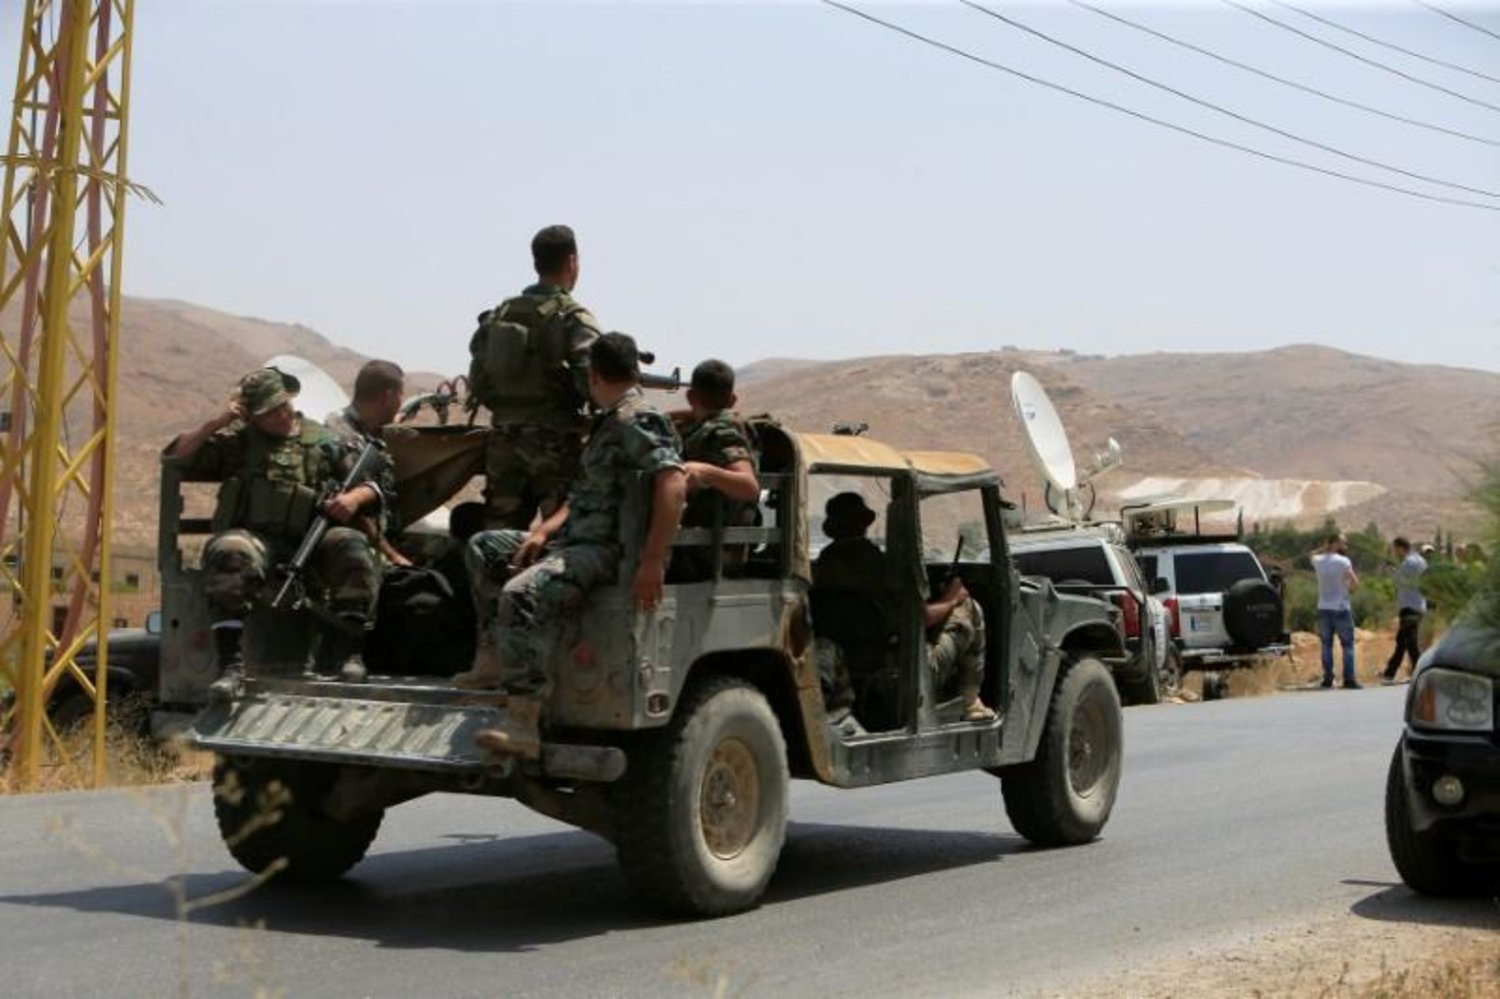 Lebanese army soldiers patrol a street in Labweh, at the entrance of the border town of Arsal, in eastern Bekaa Valley, Lebanon July 21, 2017. (Reuters)